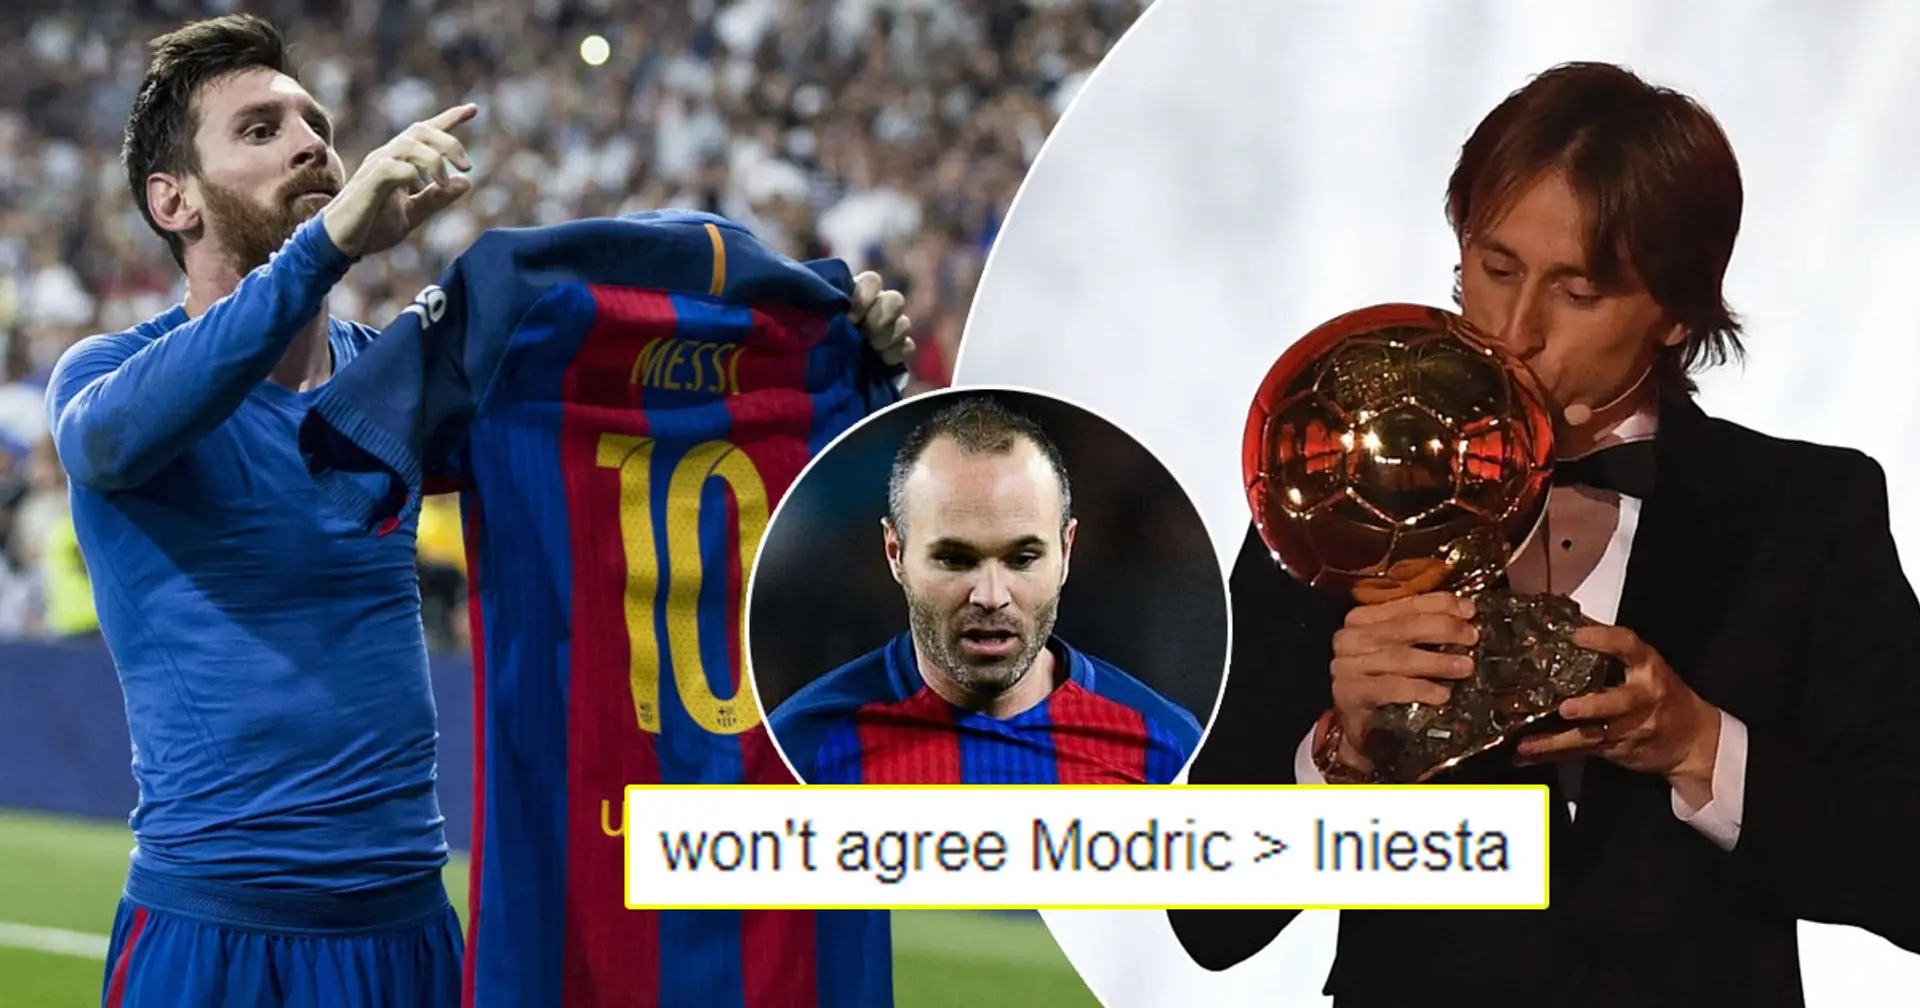 'I'm a Madrid fan but I used to applaud Messi's genius': 6 truly controversial takes from Madridistas